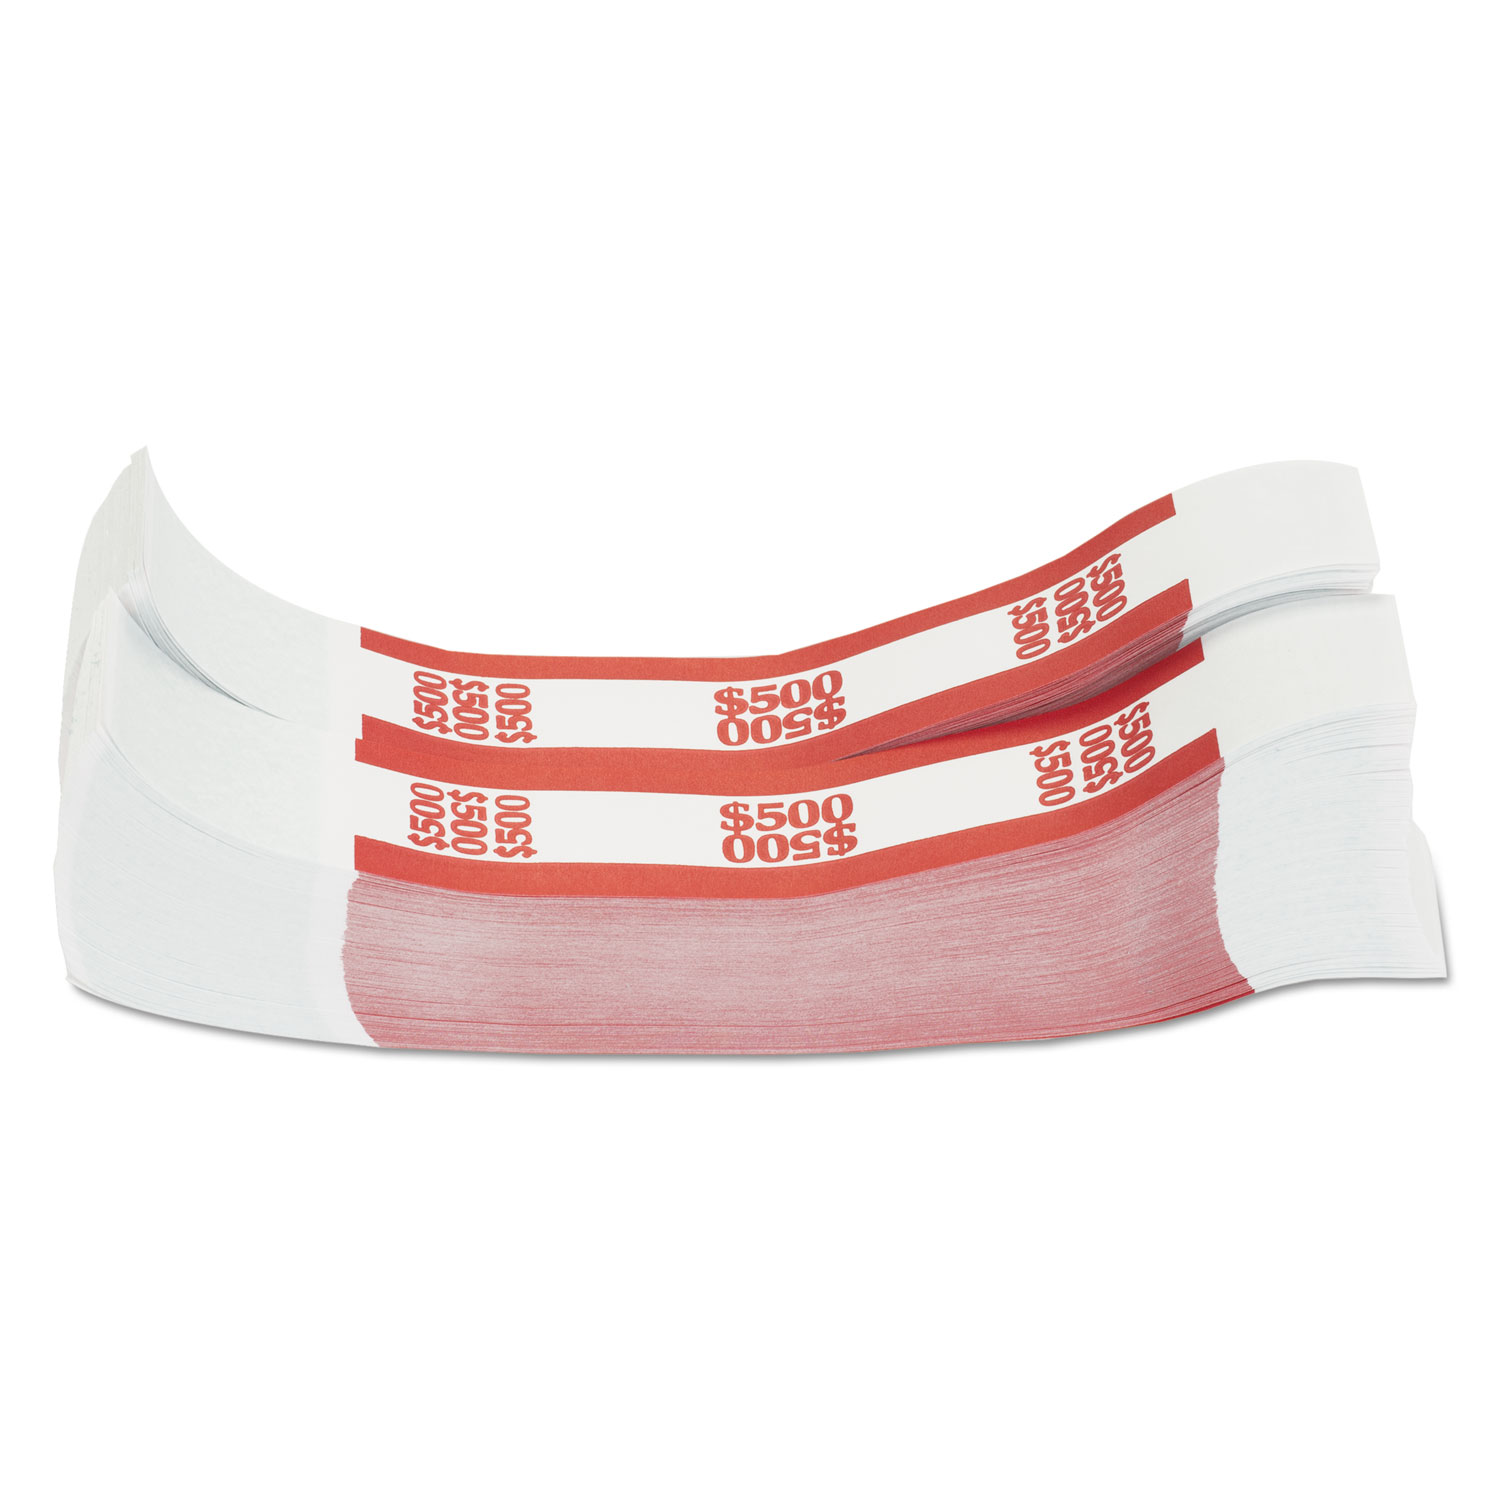  Pap-R Products 216070F07 Currency Straps, Red, $500 in $5 Bills, 1000 Bands/Pack (CTX400500) 